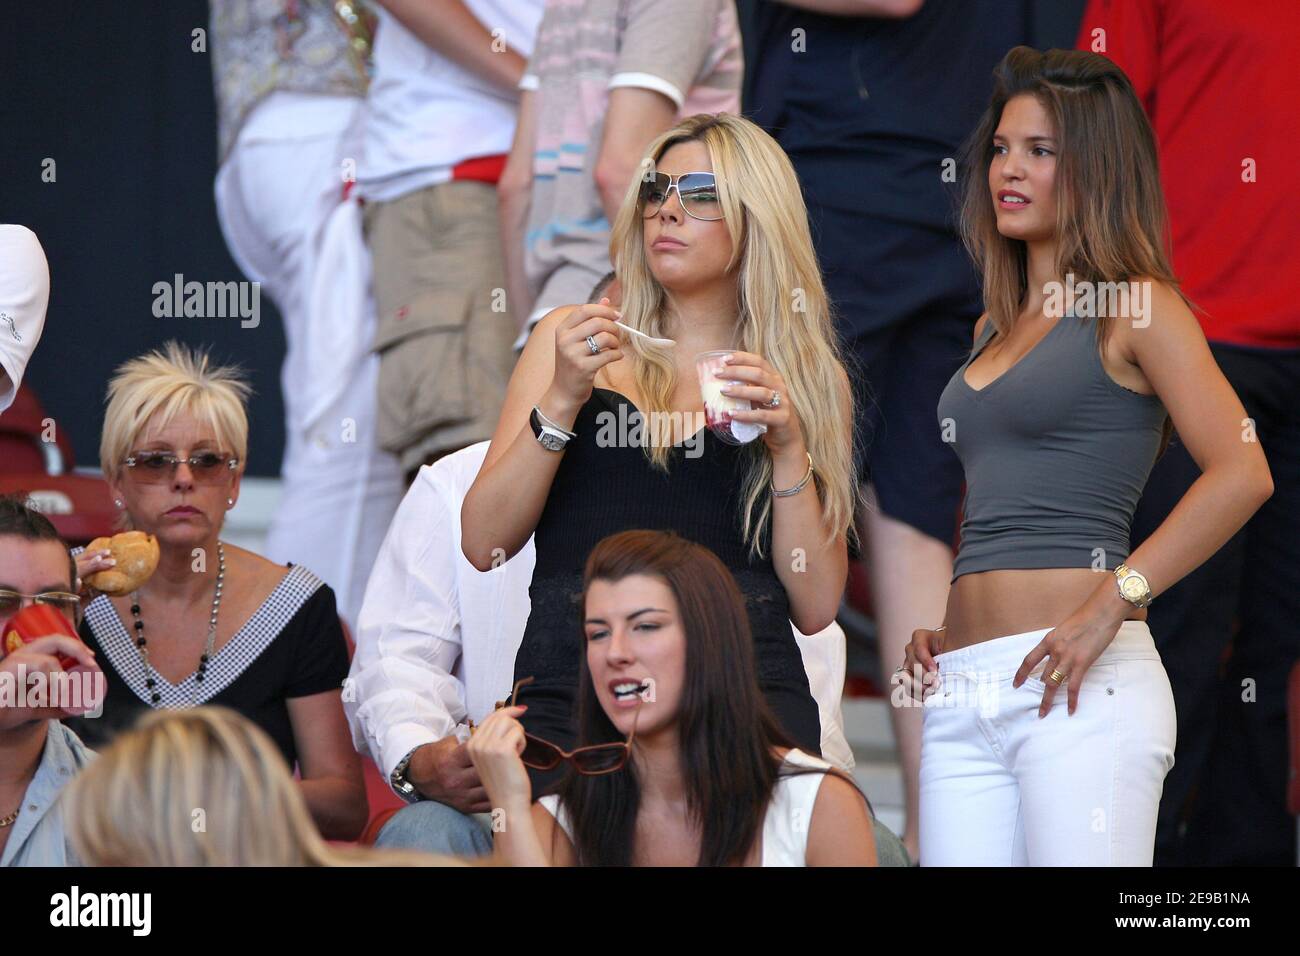 Carly Zucker (r) partner of England footballer Joe Cole and Toni Poole, fiance of England footballer John Terry attend the English vs Ecuador match as part of the 2006 Worl Cup, in Stuttgart, Germany, on June 25, 2006. Photo by Gouhier-Hahn-Orban/Cameleon/ABACAPRESS.COM Stock Photo